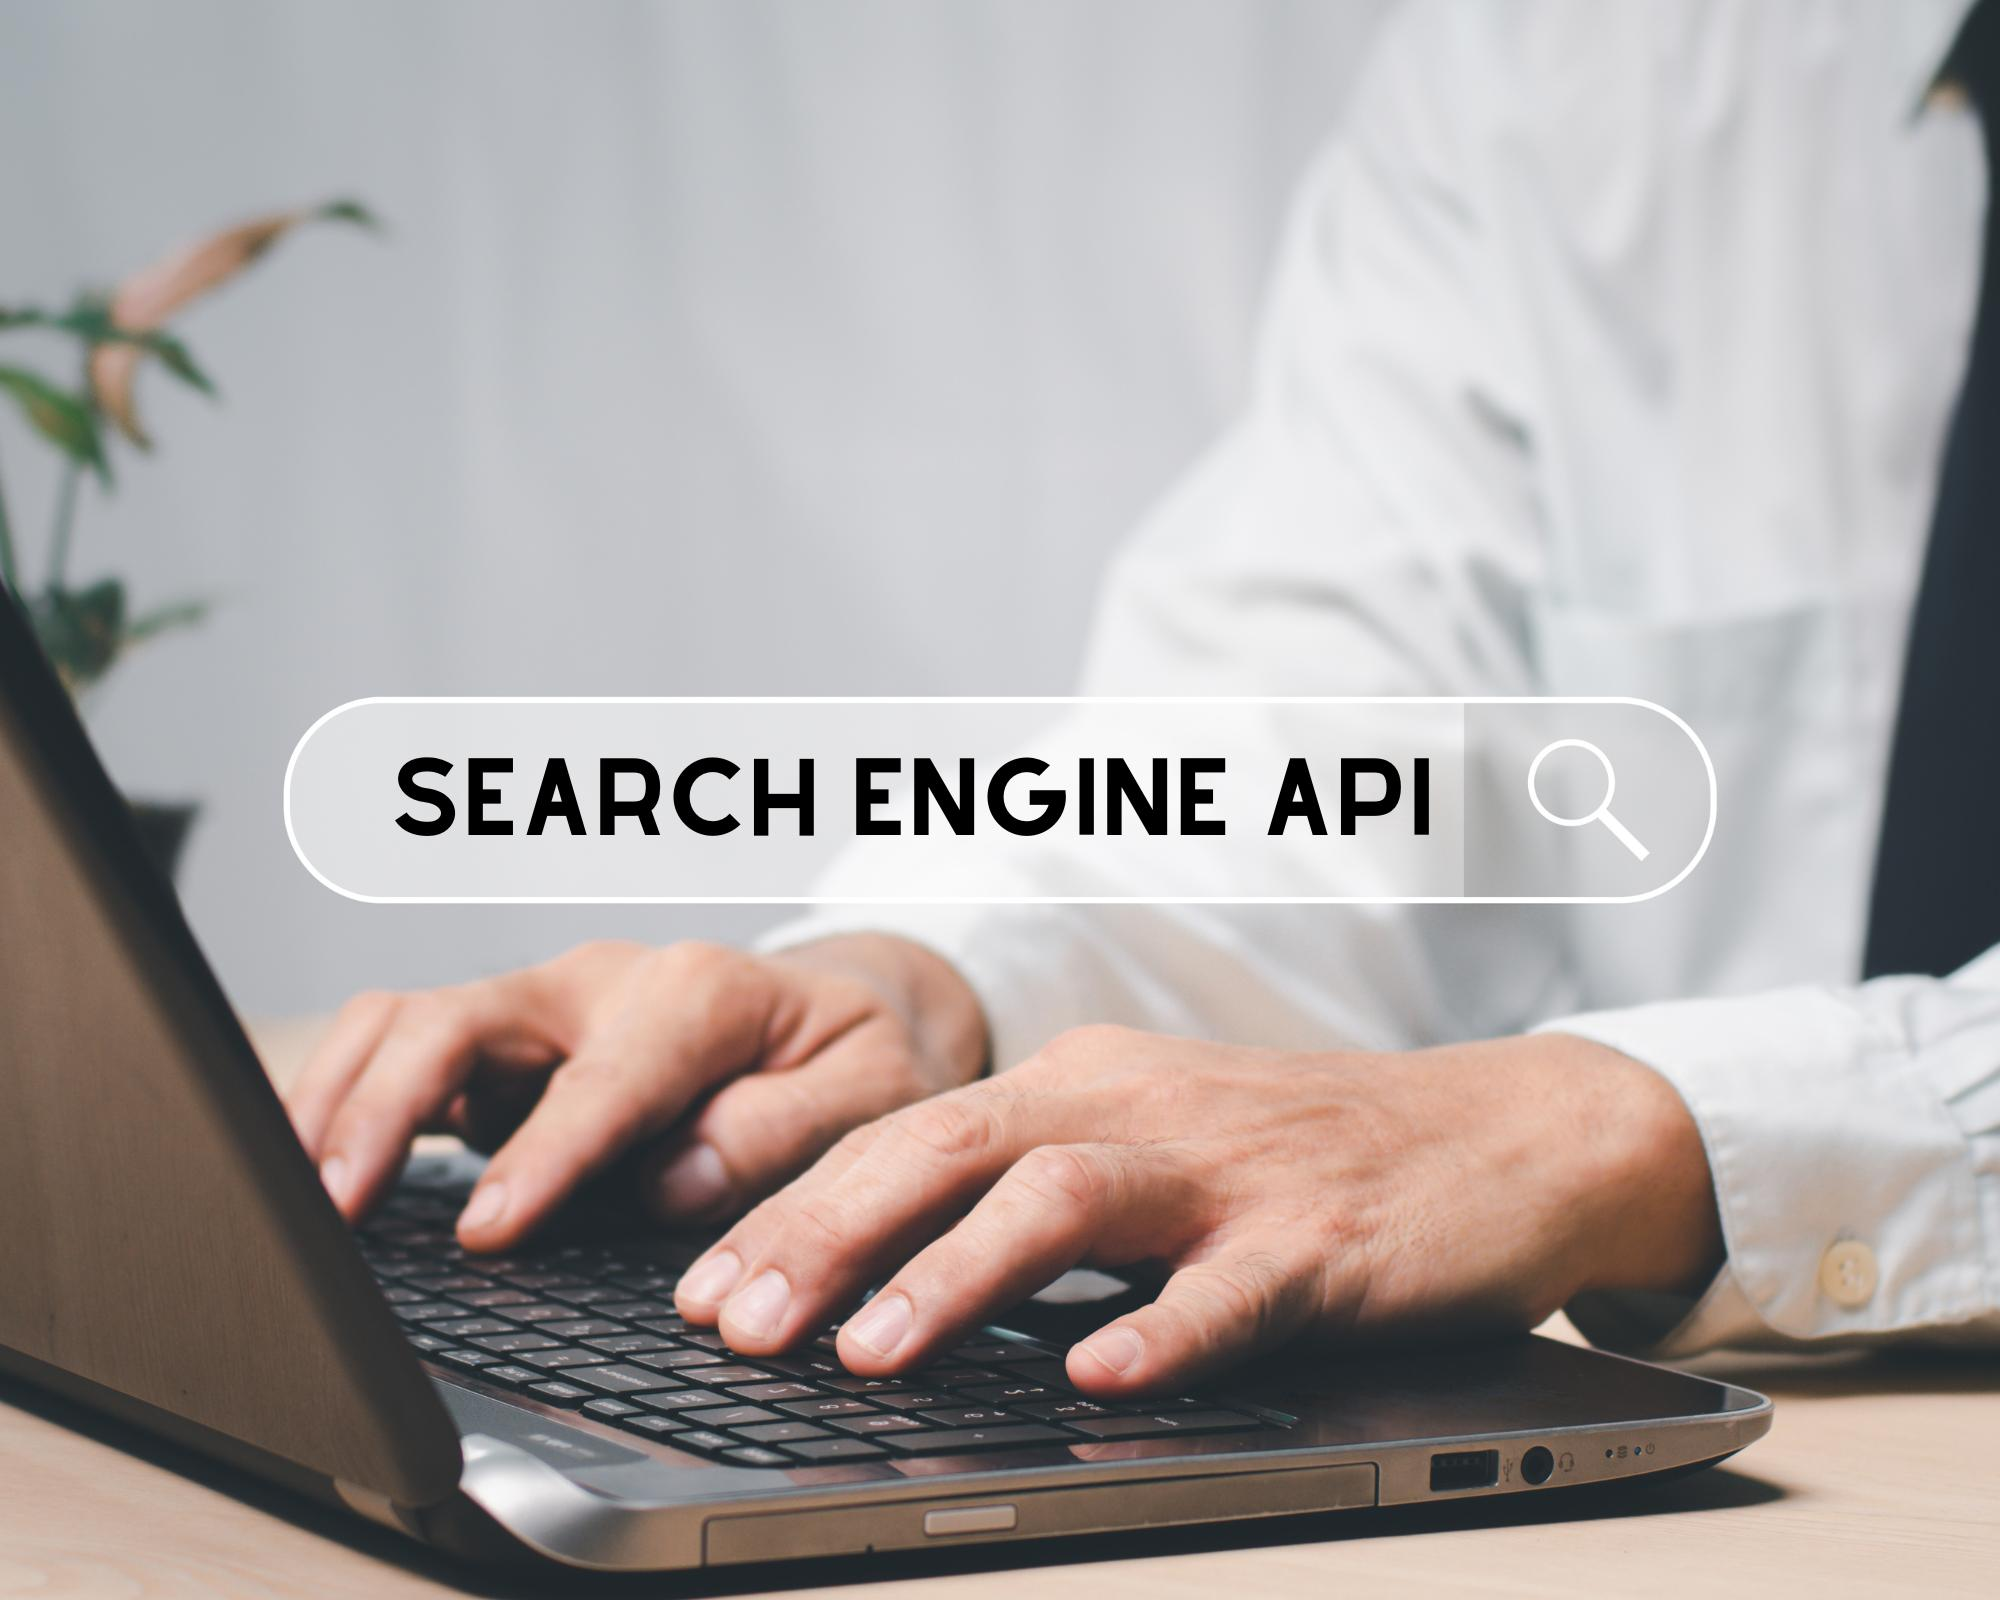 The Role of Search Engine APIs